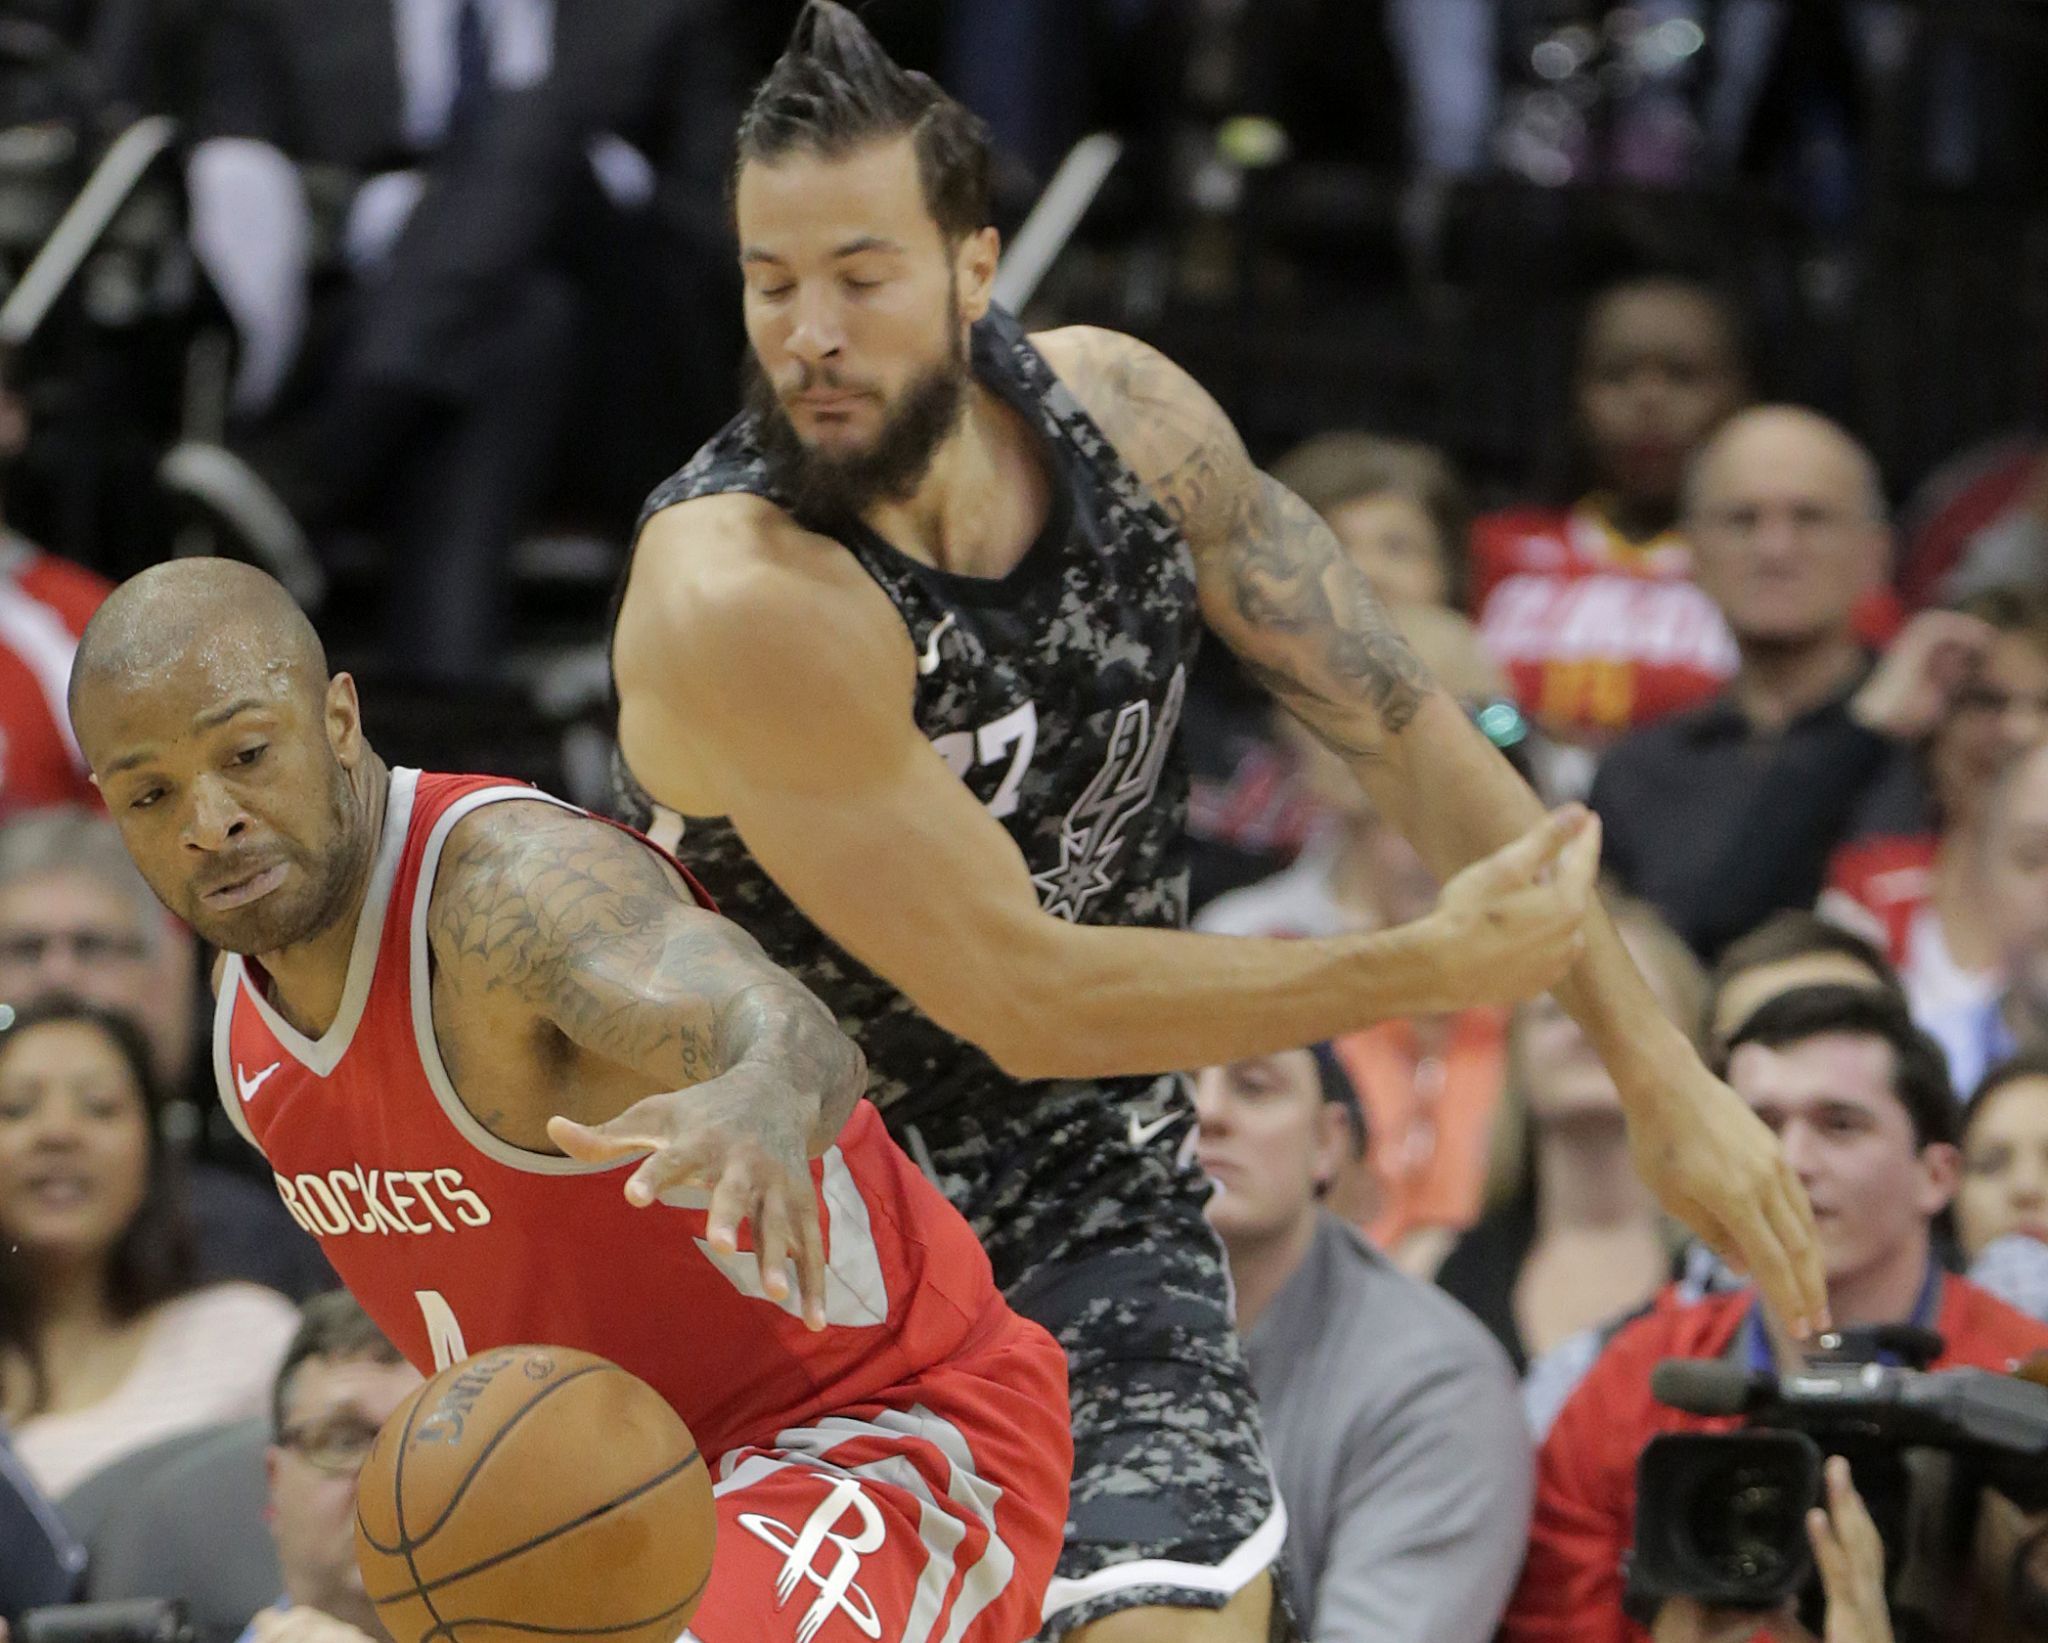 P.J. Tucker brings defensive energy to Rockets' starting lineup - Houston Chronicle